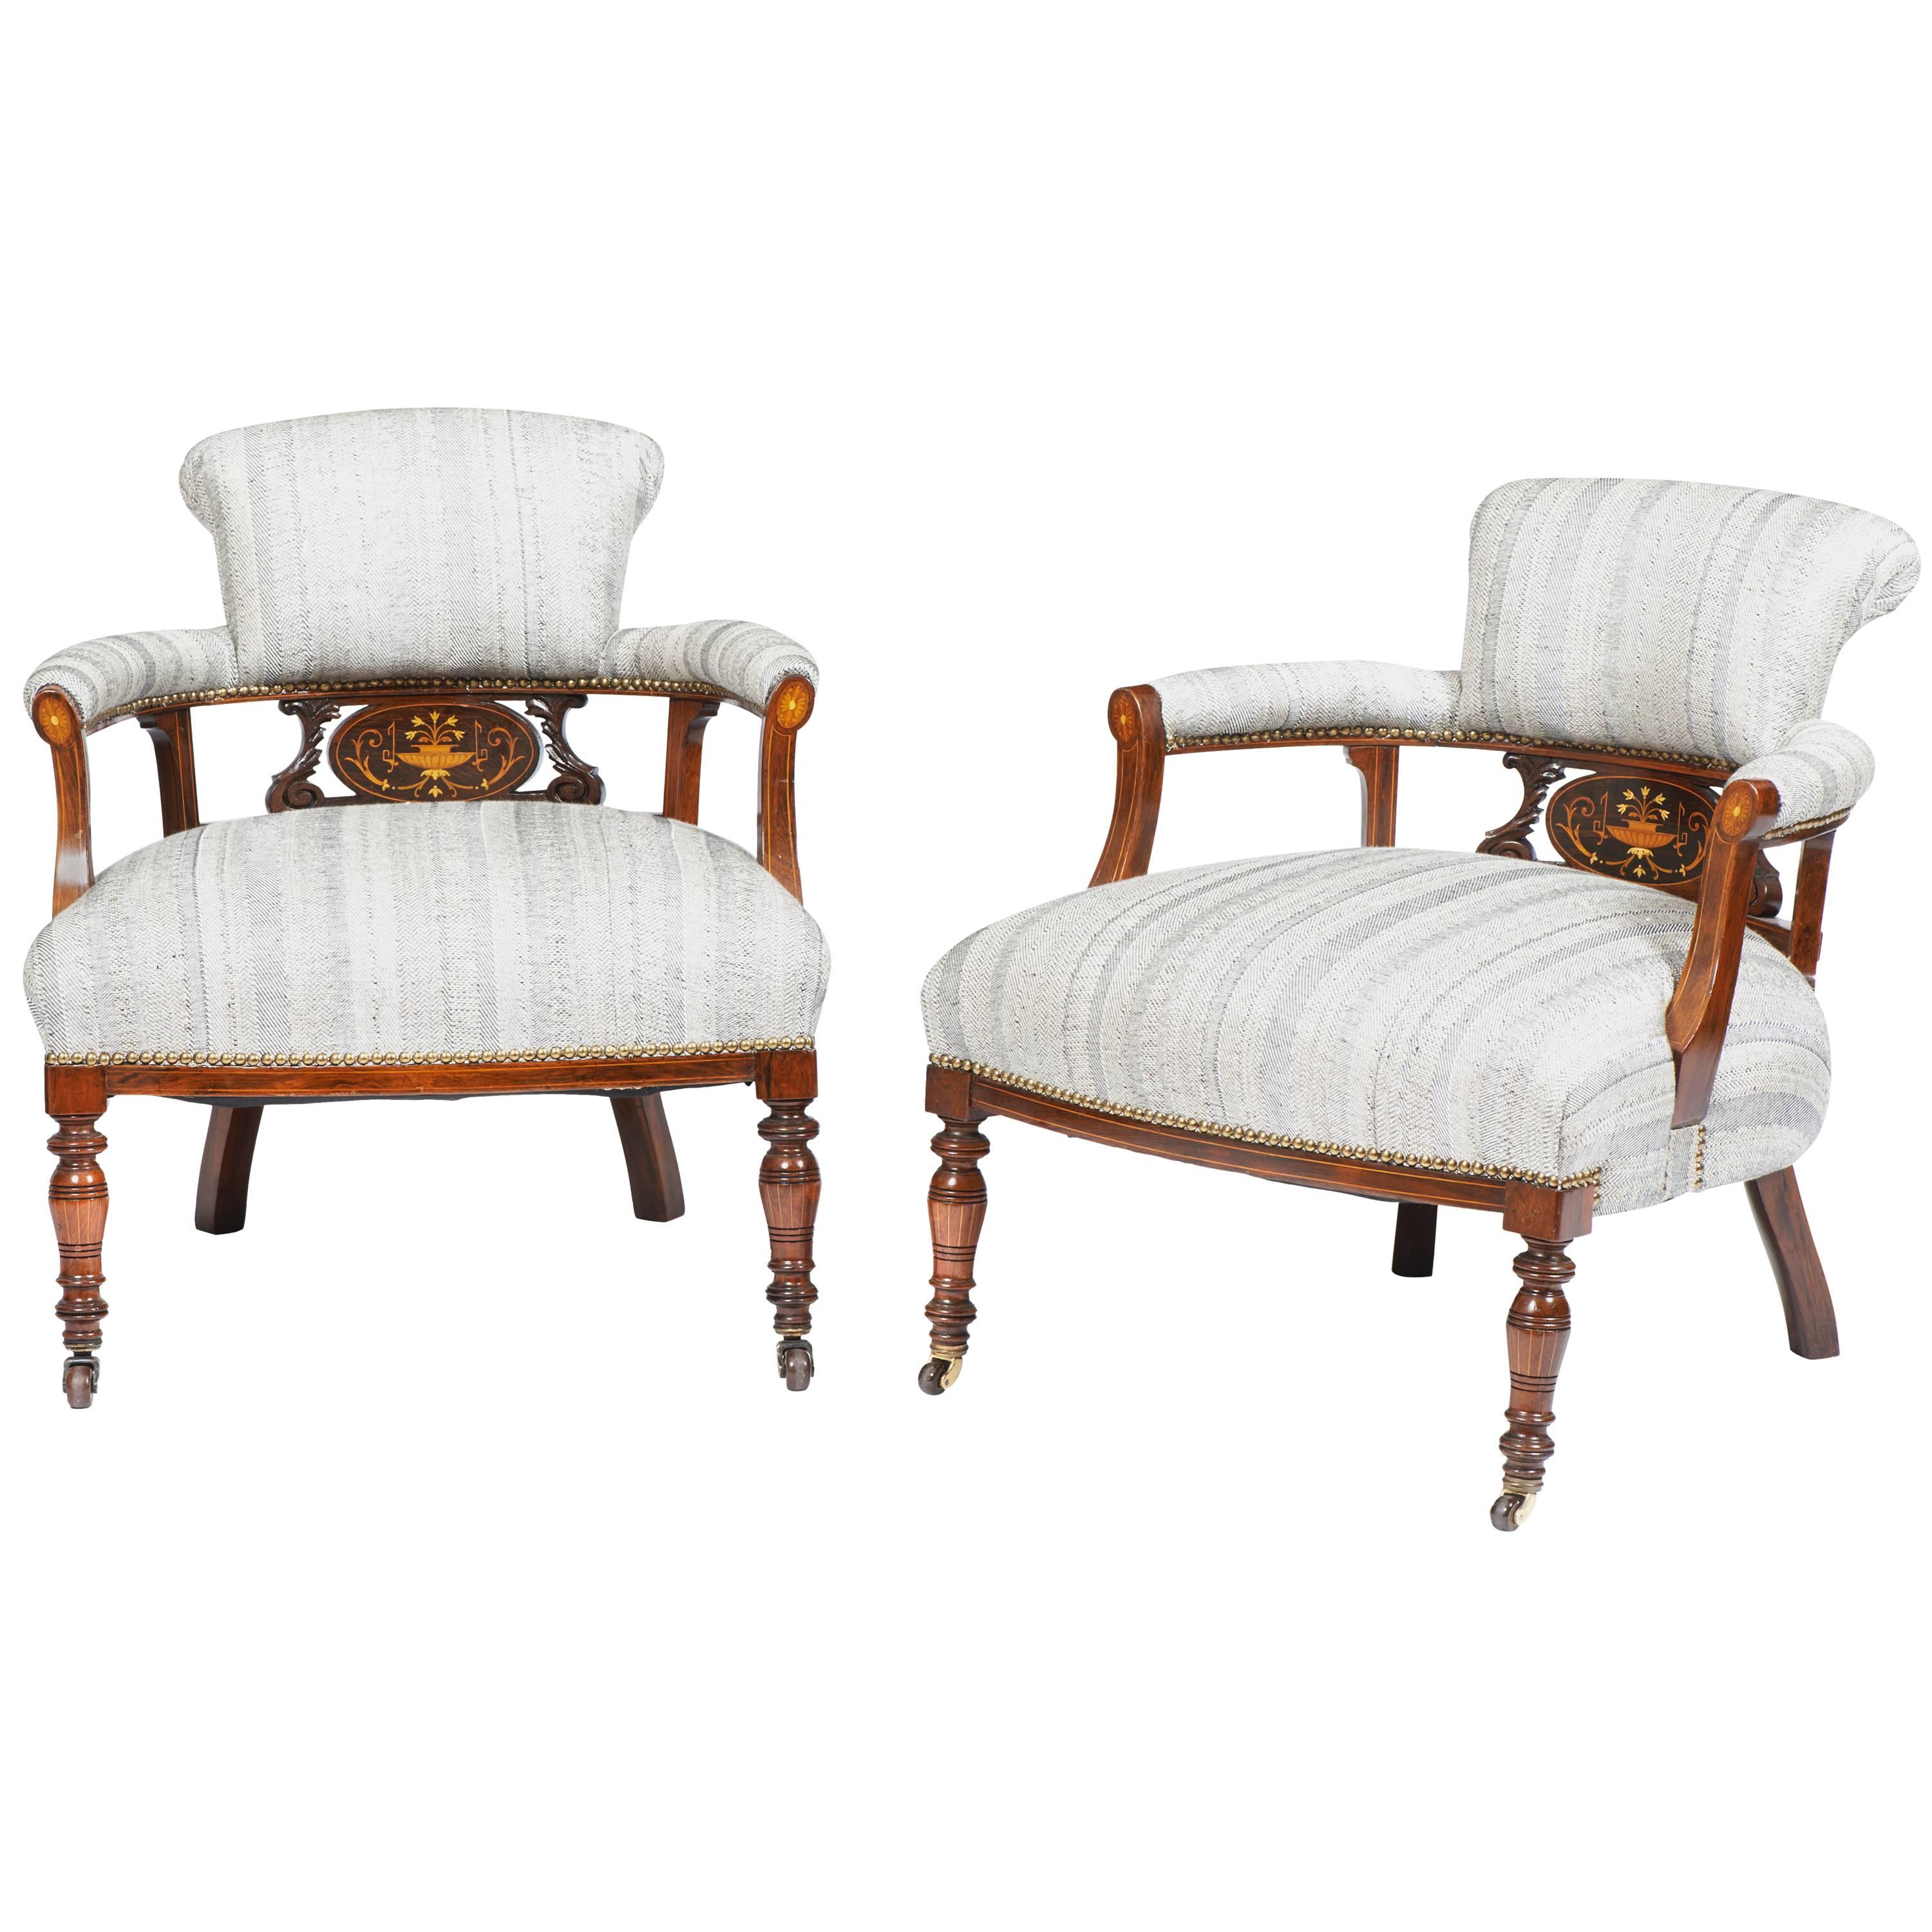 English Victorian Tub Chairs on Rosewood For Sale